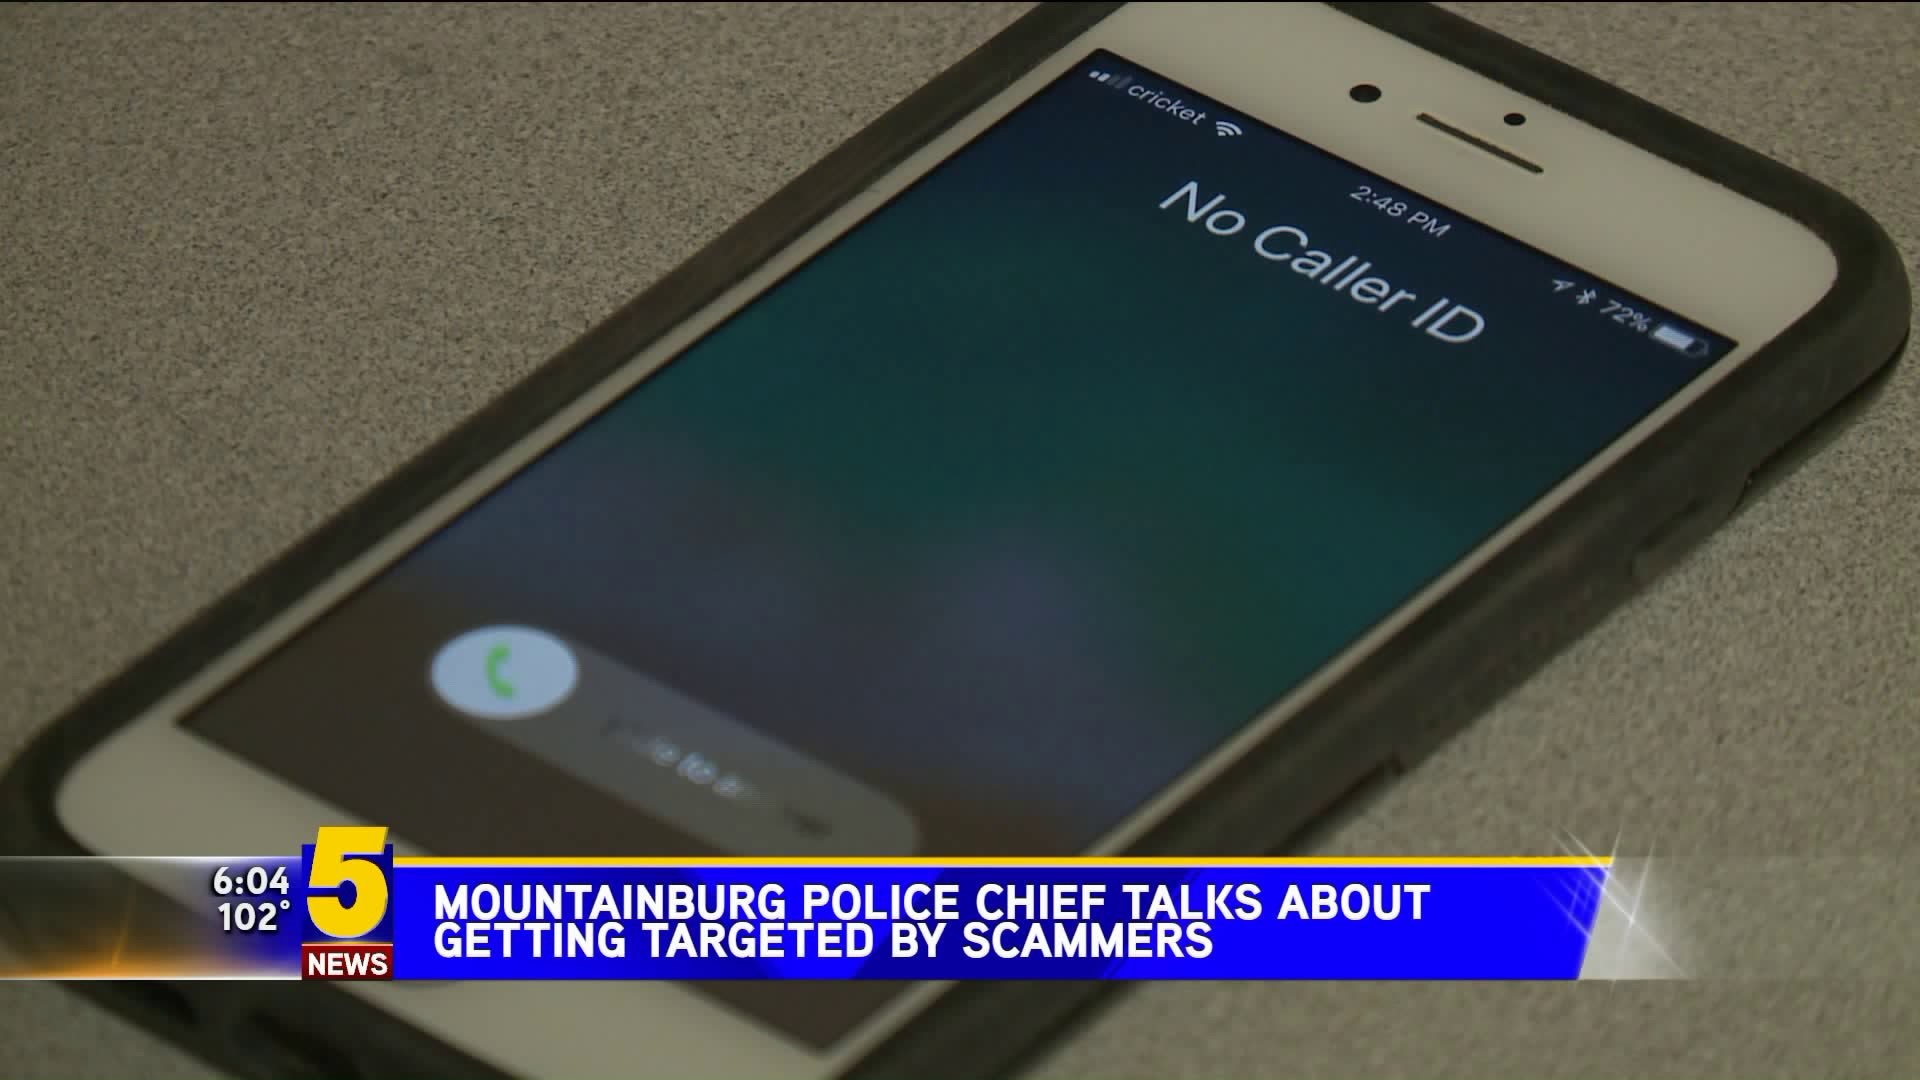 Mountainburg PD Warning About Scam